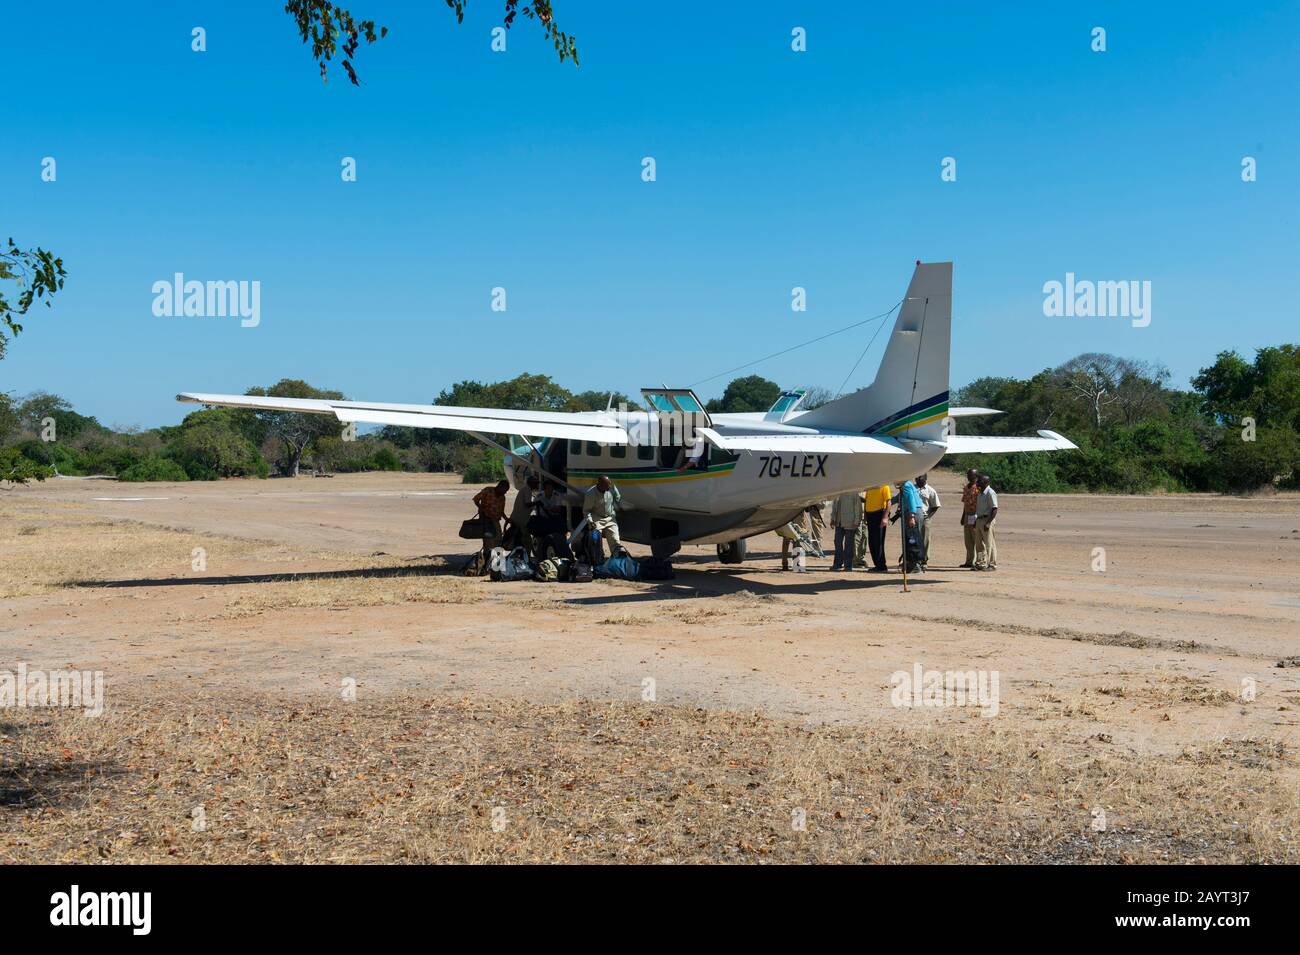 The landing strip with Cessna plane at Mvuu lodge in Liwonde National Park, Malawi. Stock Photo